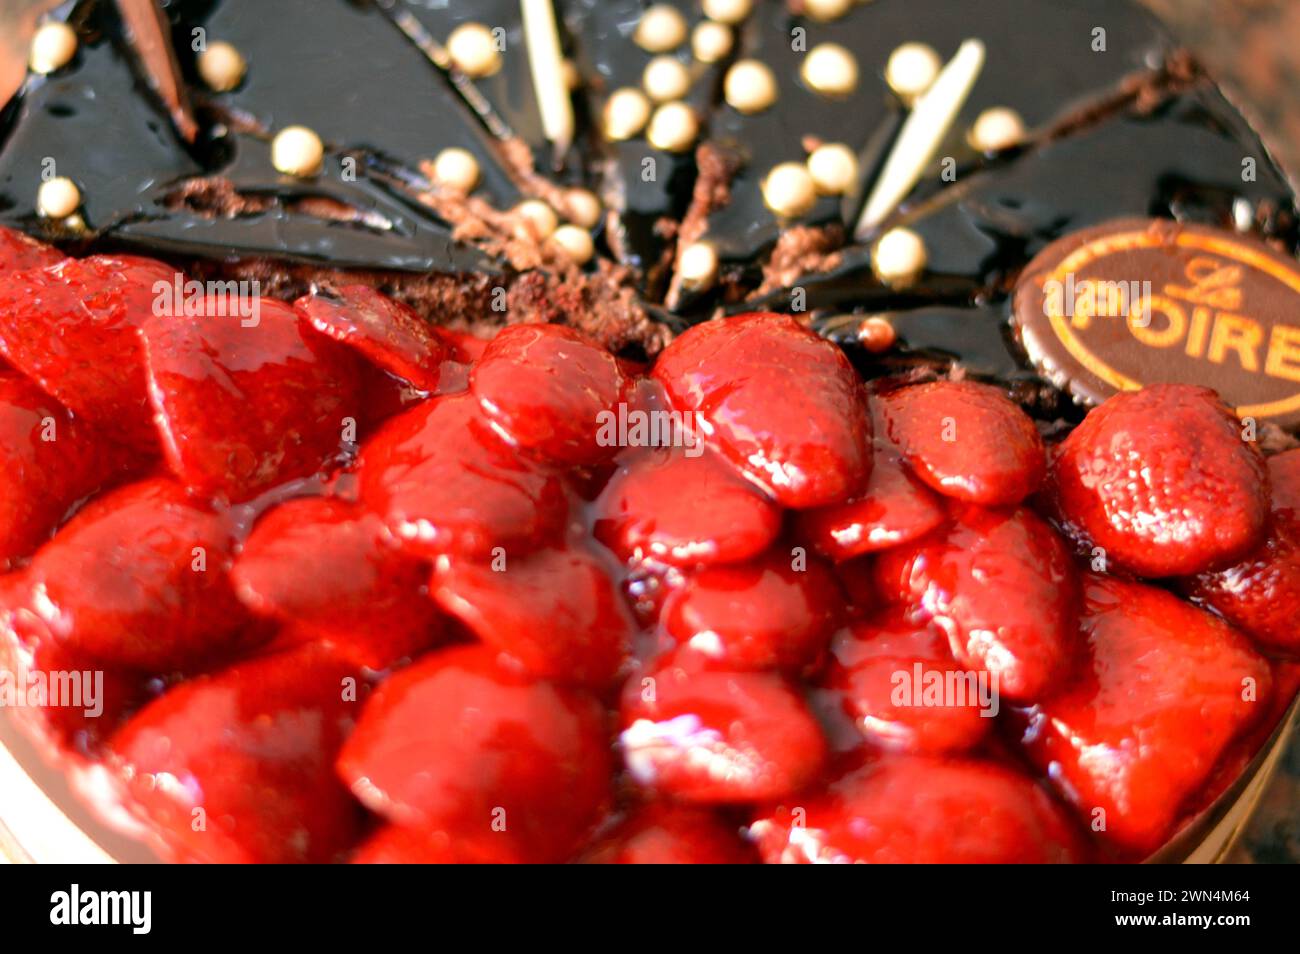 Cairo, Egypt, February 28 2024: La Poire Traditions of French patisseries and Egyptian baking roots, a half chocolate and half strawberry fruit and wh Stock Photo